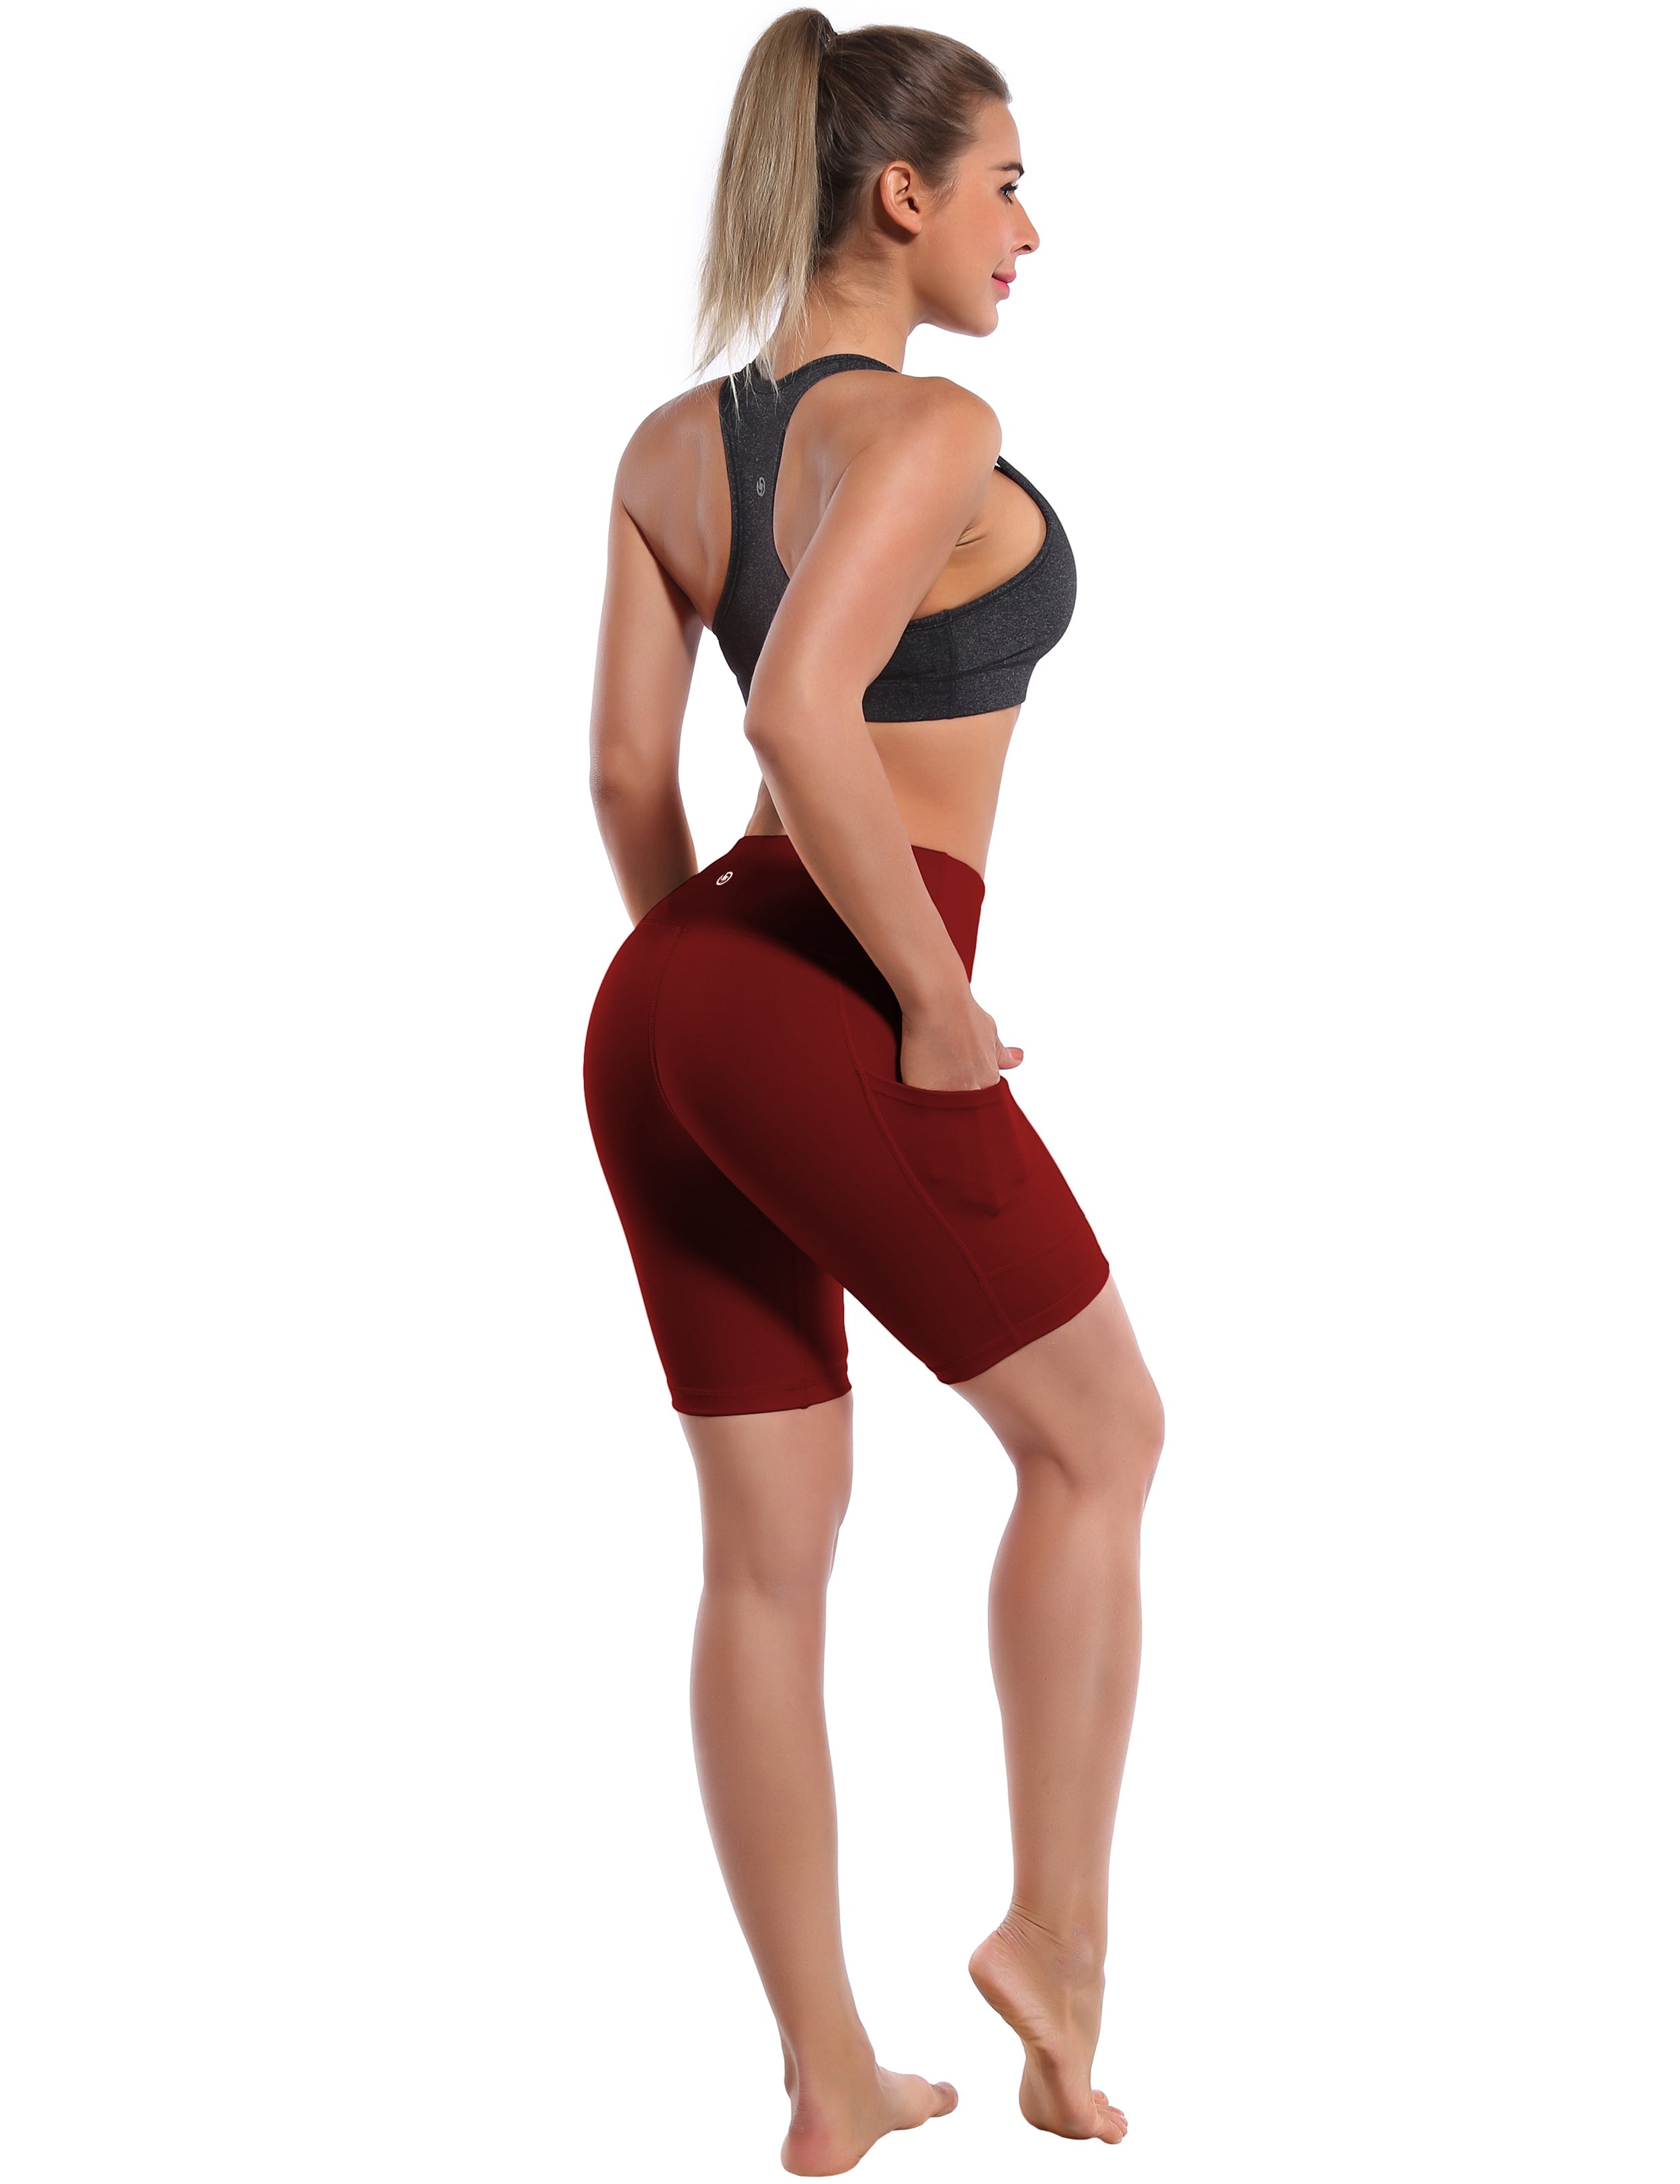 8" Side Pockets Pilates Shorts cherryred Sleek, soft, smooth and totally comfortable: our newest style is here. Softest-ever fabric High elasticity High density 4-way stretch Fabric doesn't attract lint easily No see-through Moisture-wicking Machine wash 75% Nylon, 25% Spandex